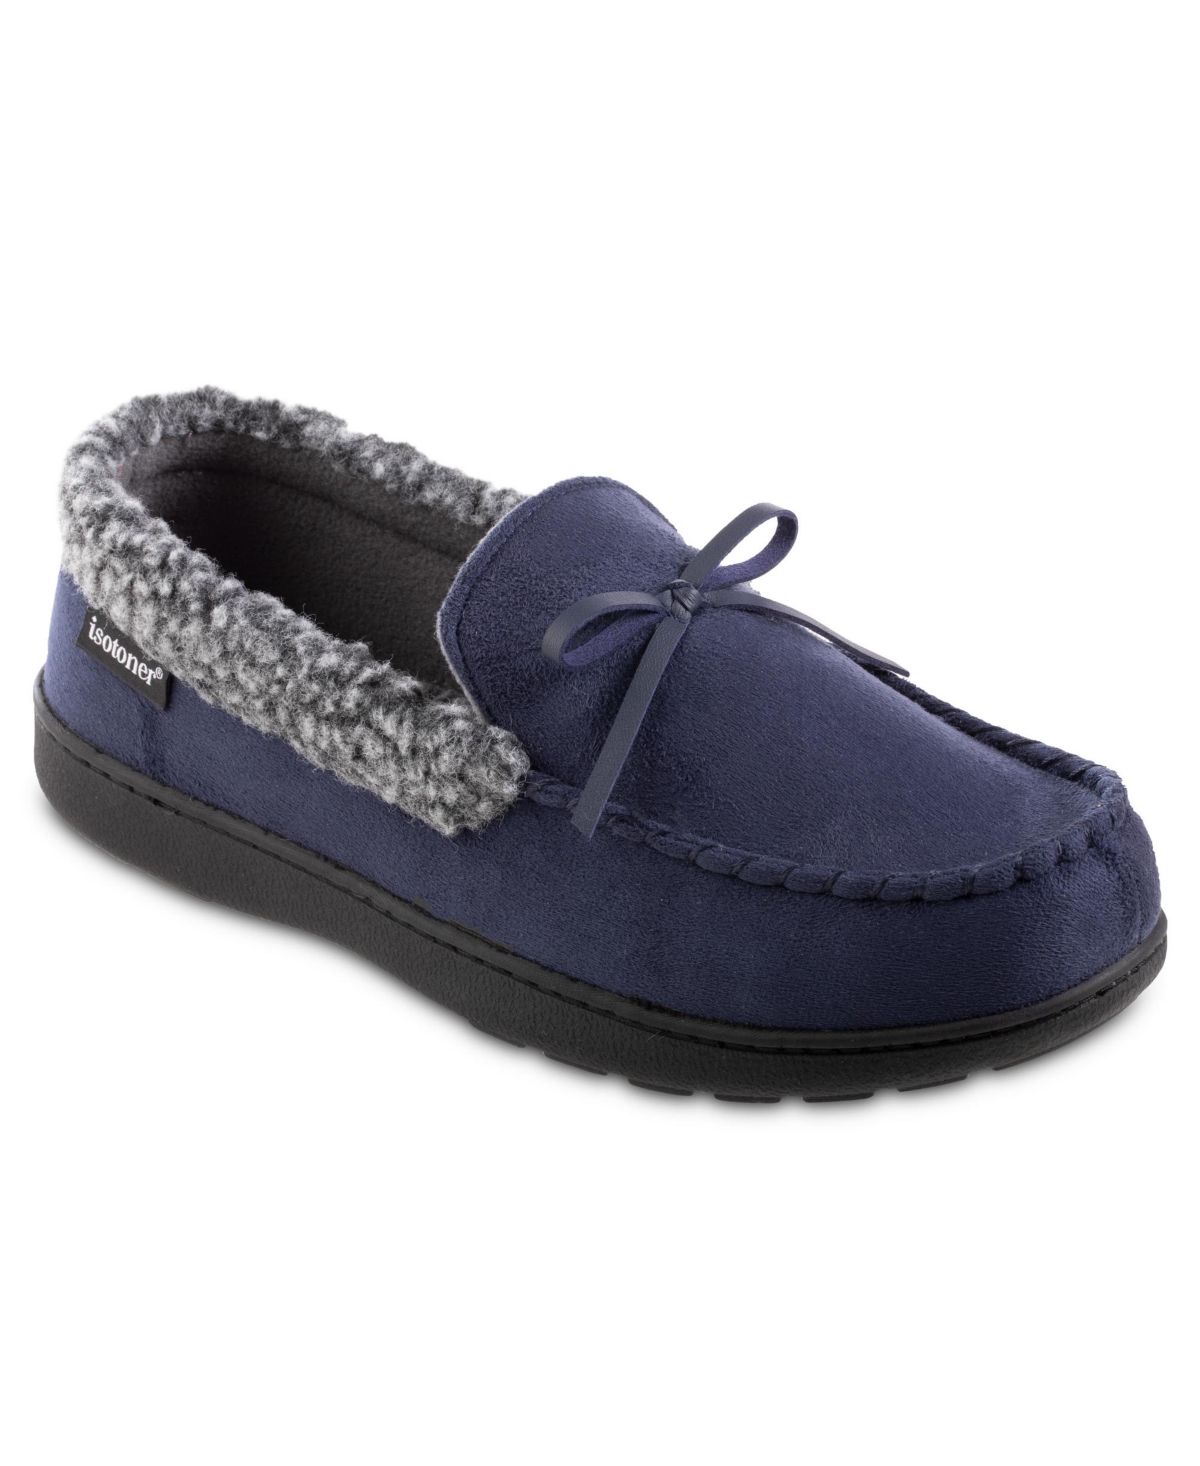 Isotoner Signature Men's Moccasin Slippers In Navy Blue